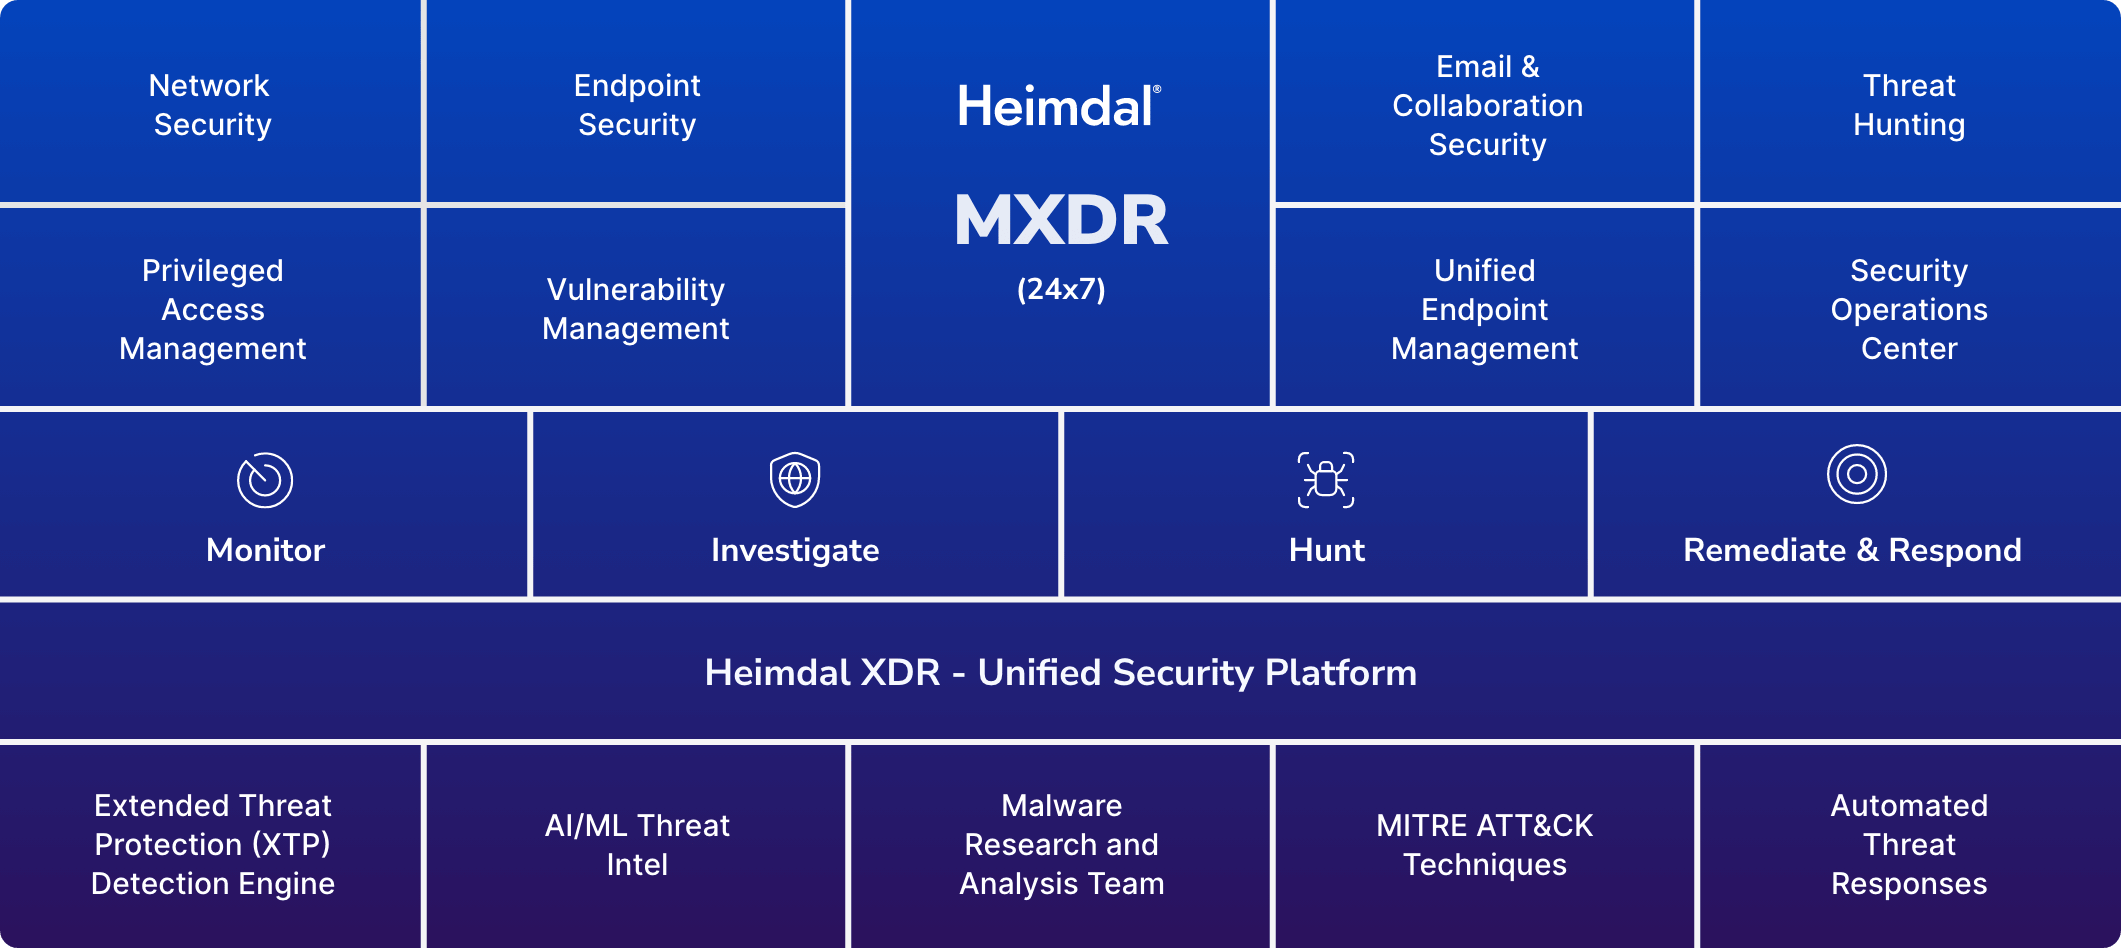 The full Heimdal MXDR product and service suite